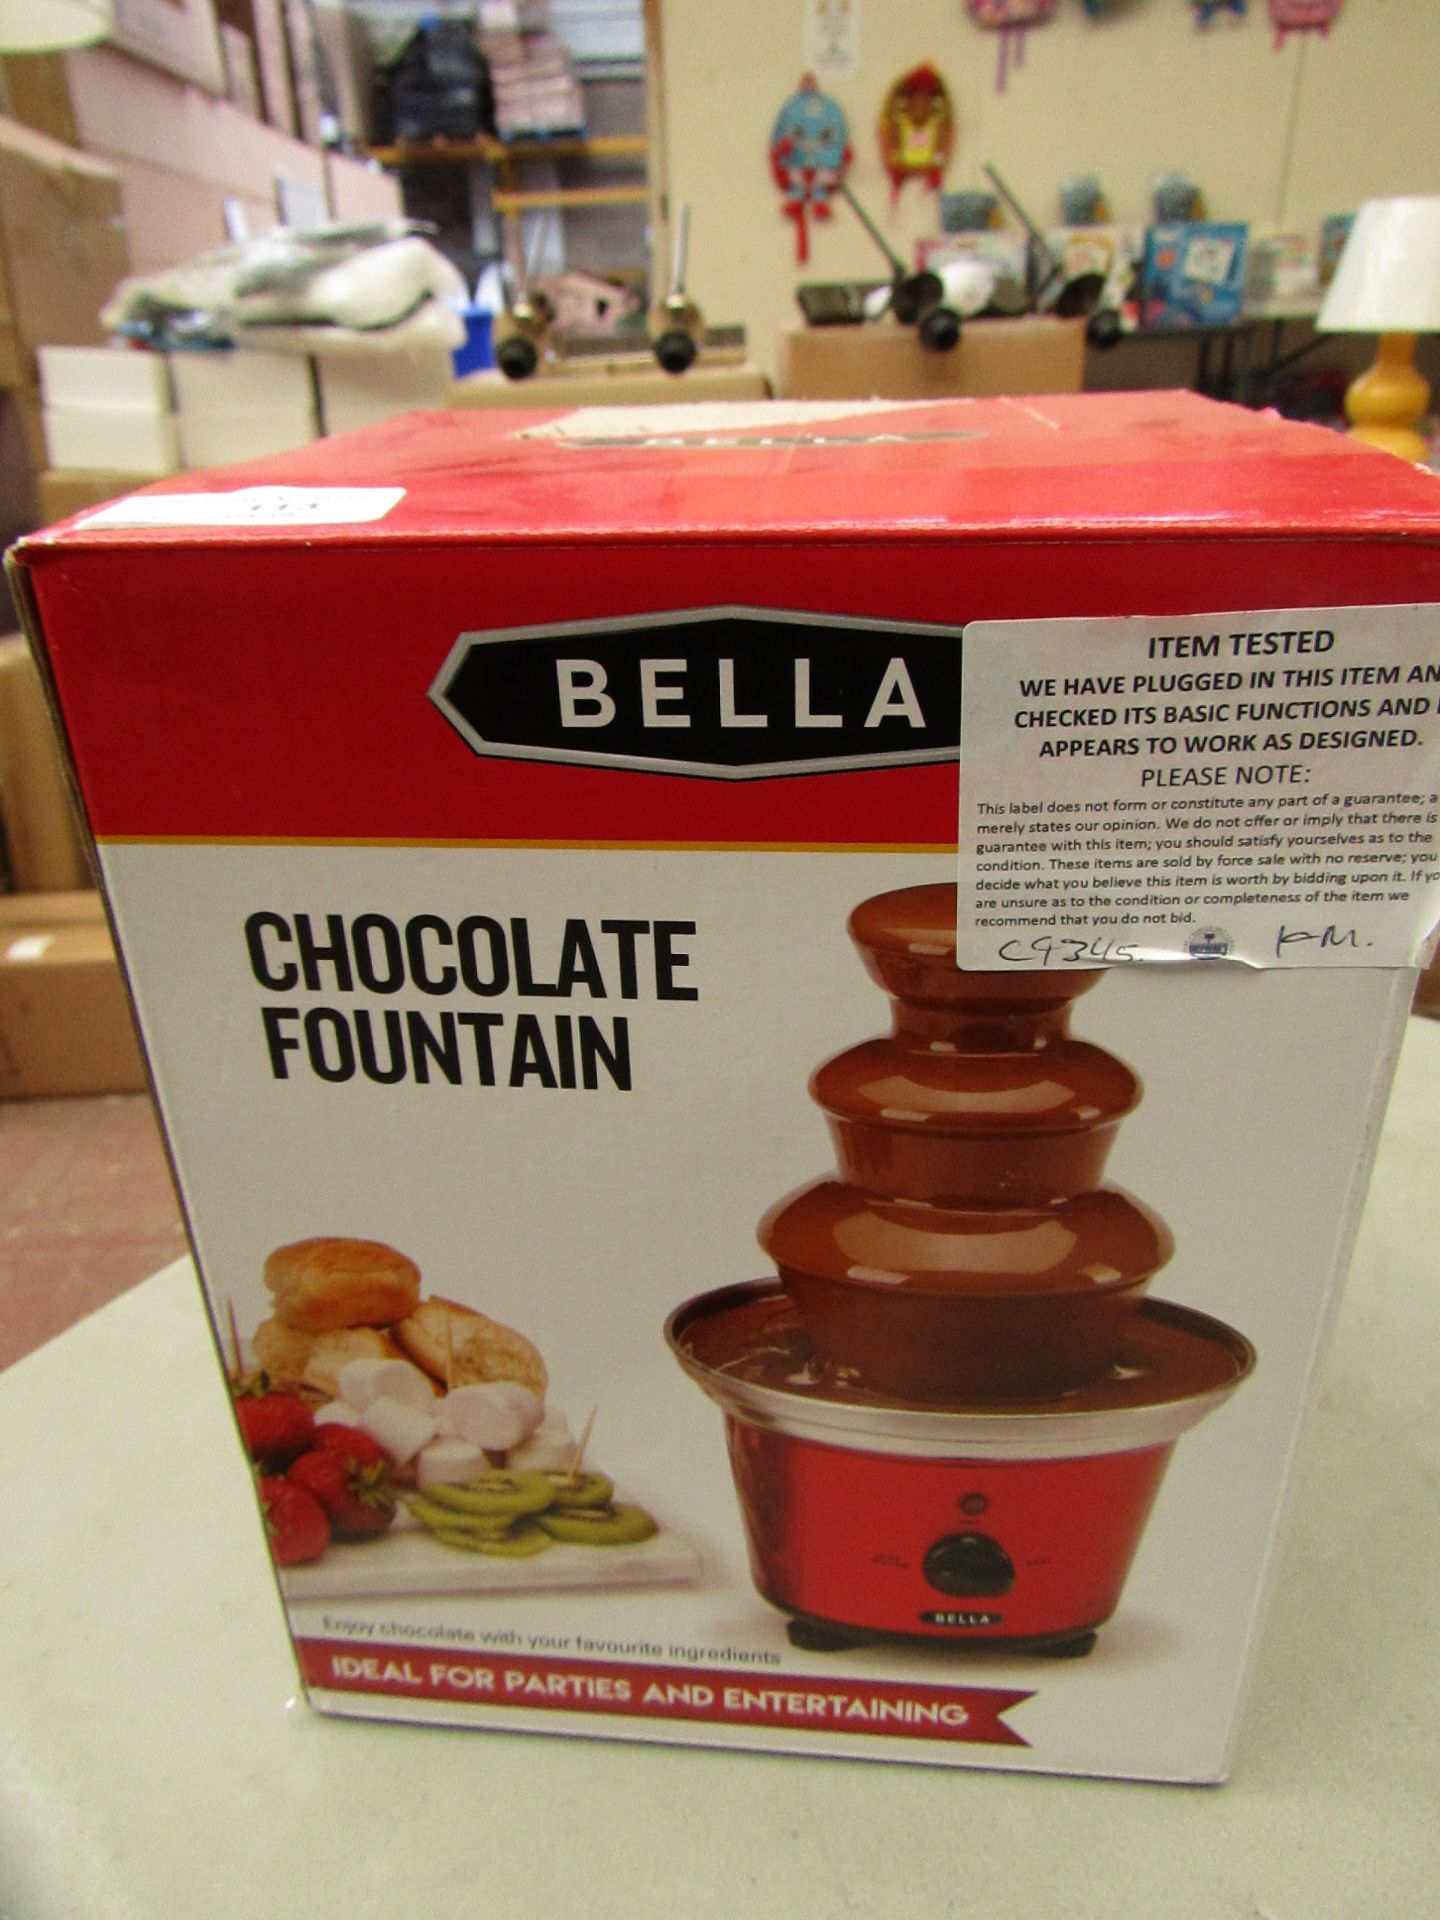 Bella chocolate fountain. Tested working & boxed.